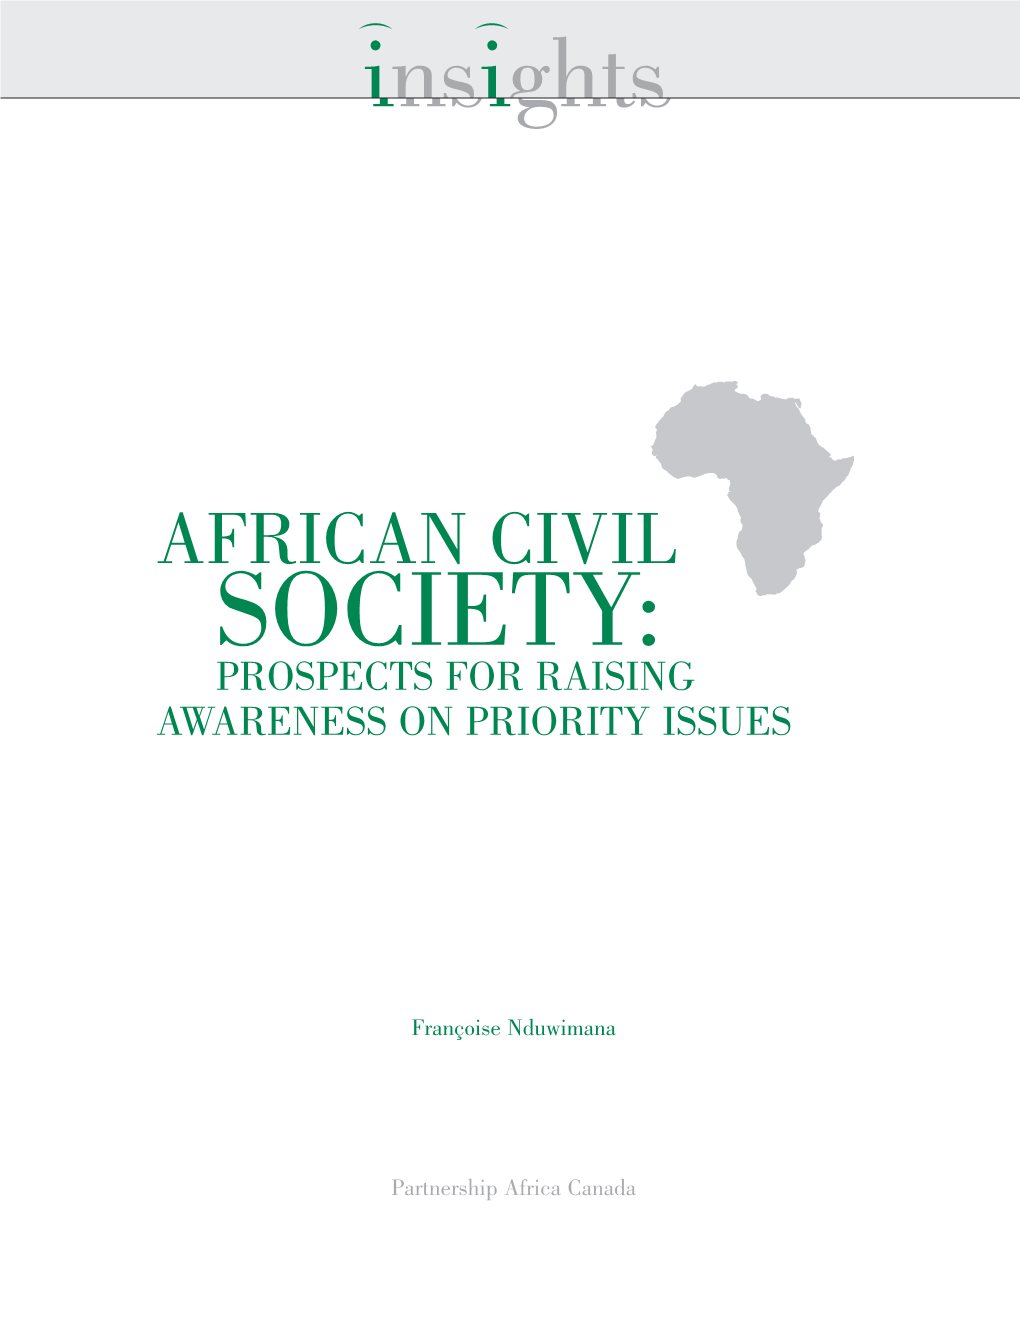 African Civil Society: Prospects for Raising Awareness on Priority Issues